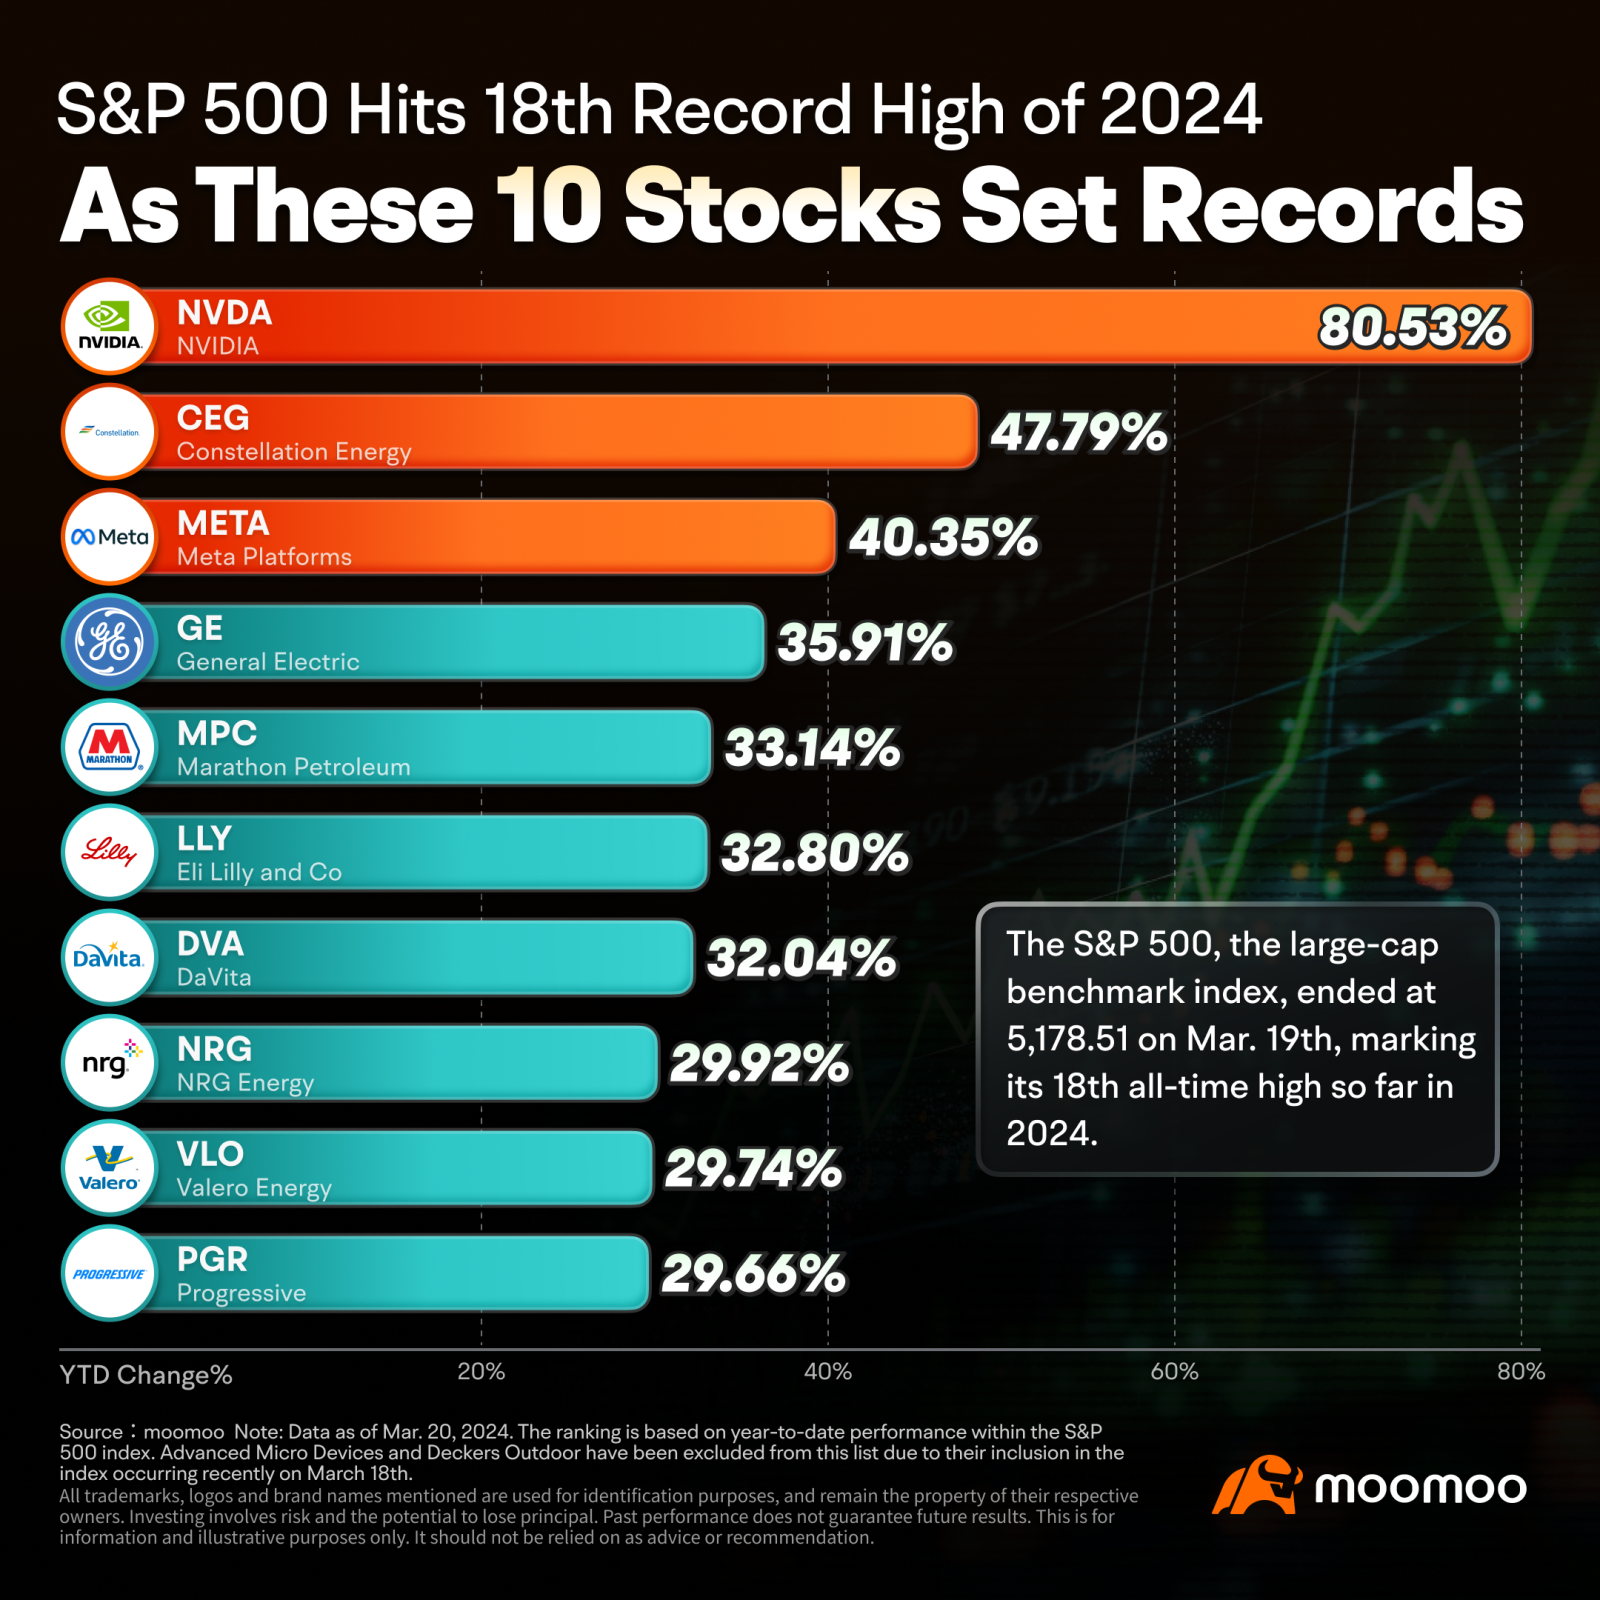 S&P 500 Set Another New High: Broader Market Rally Set to Outshine Tech Dominance